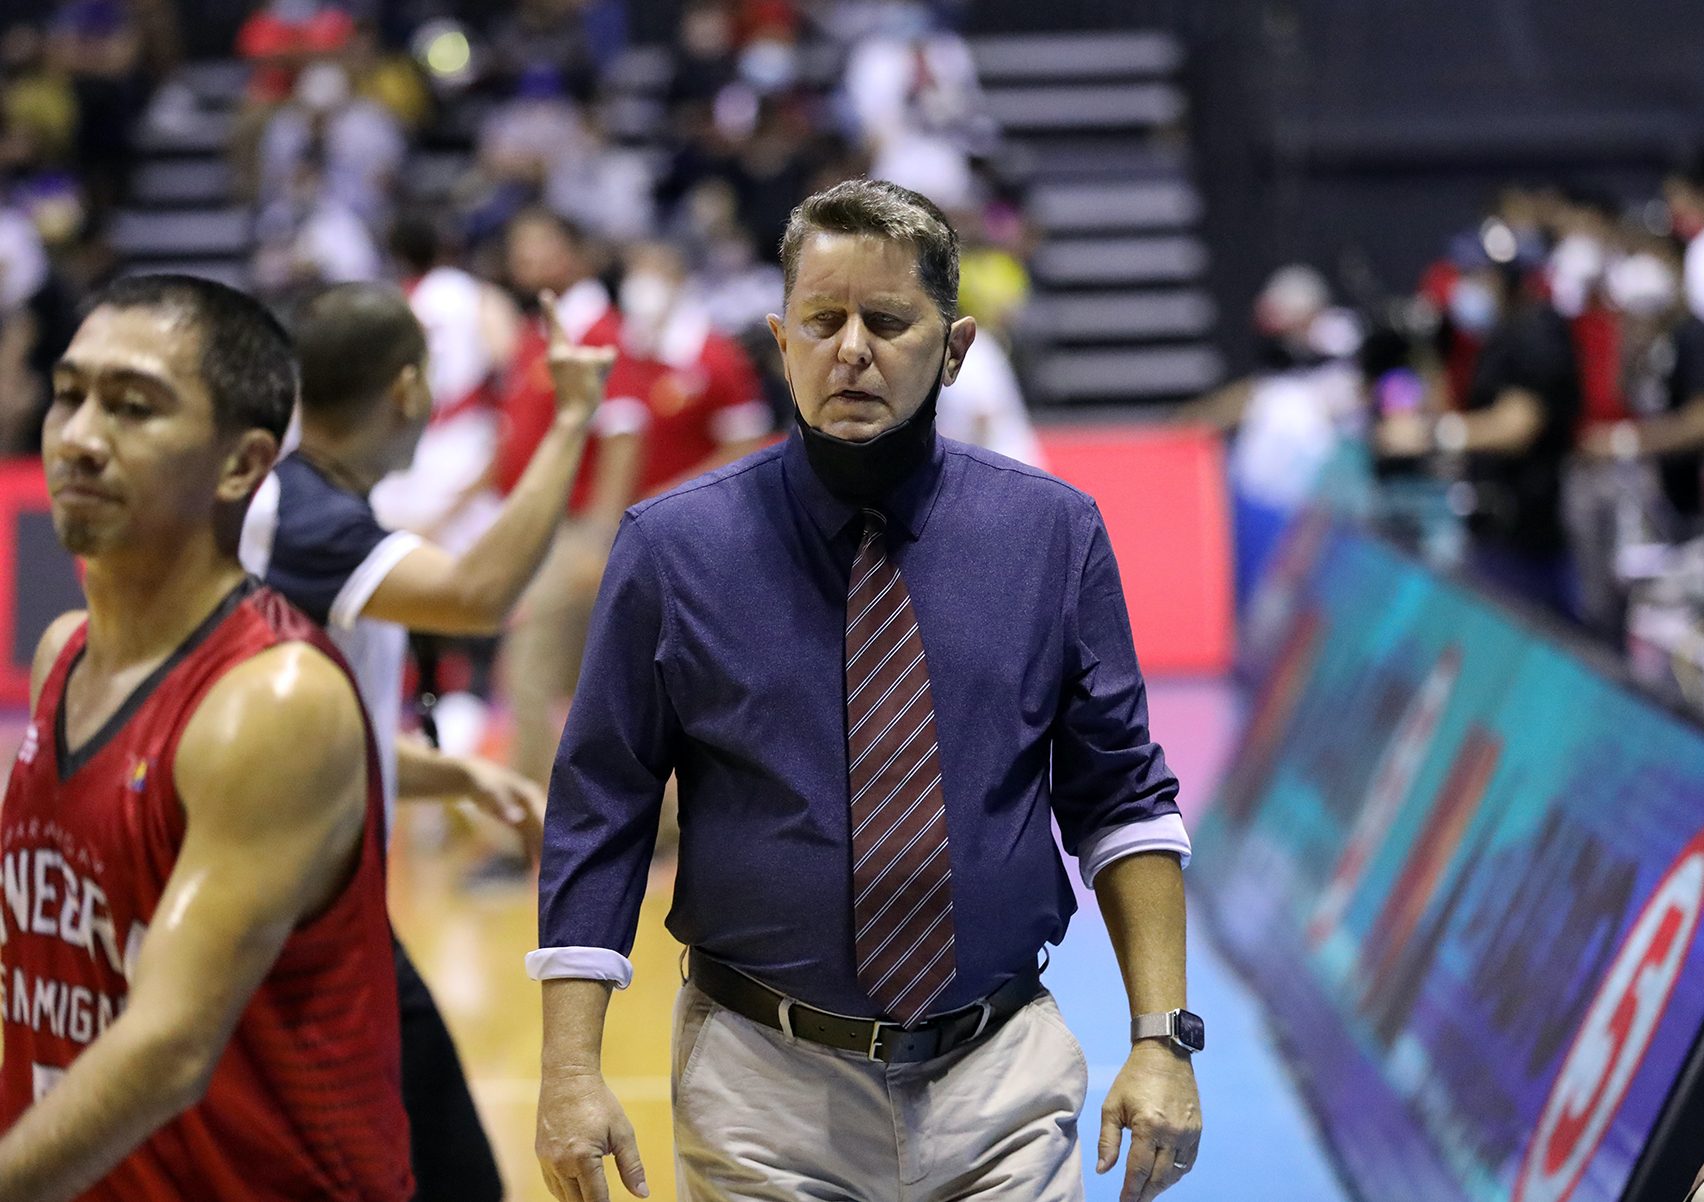 Tim Cone has Chot Reyes’ back in Gilas Pilipinas reunion: ‘Through thick and thin’